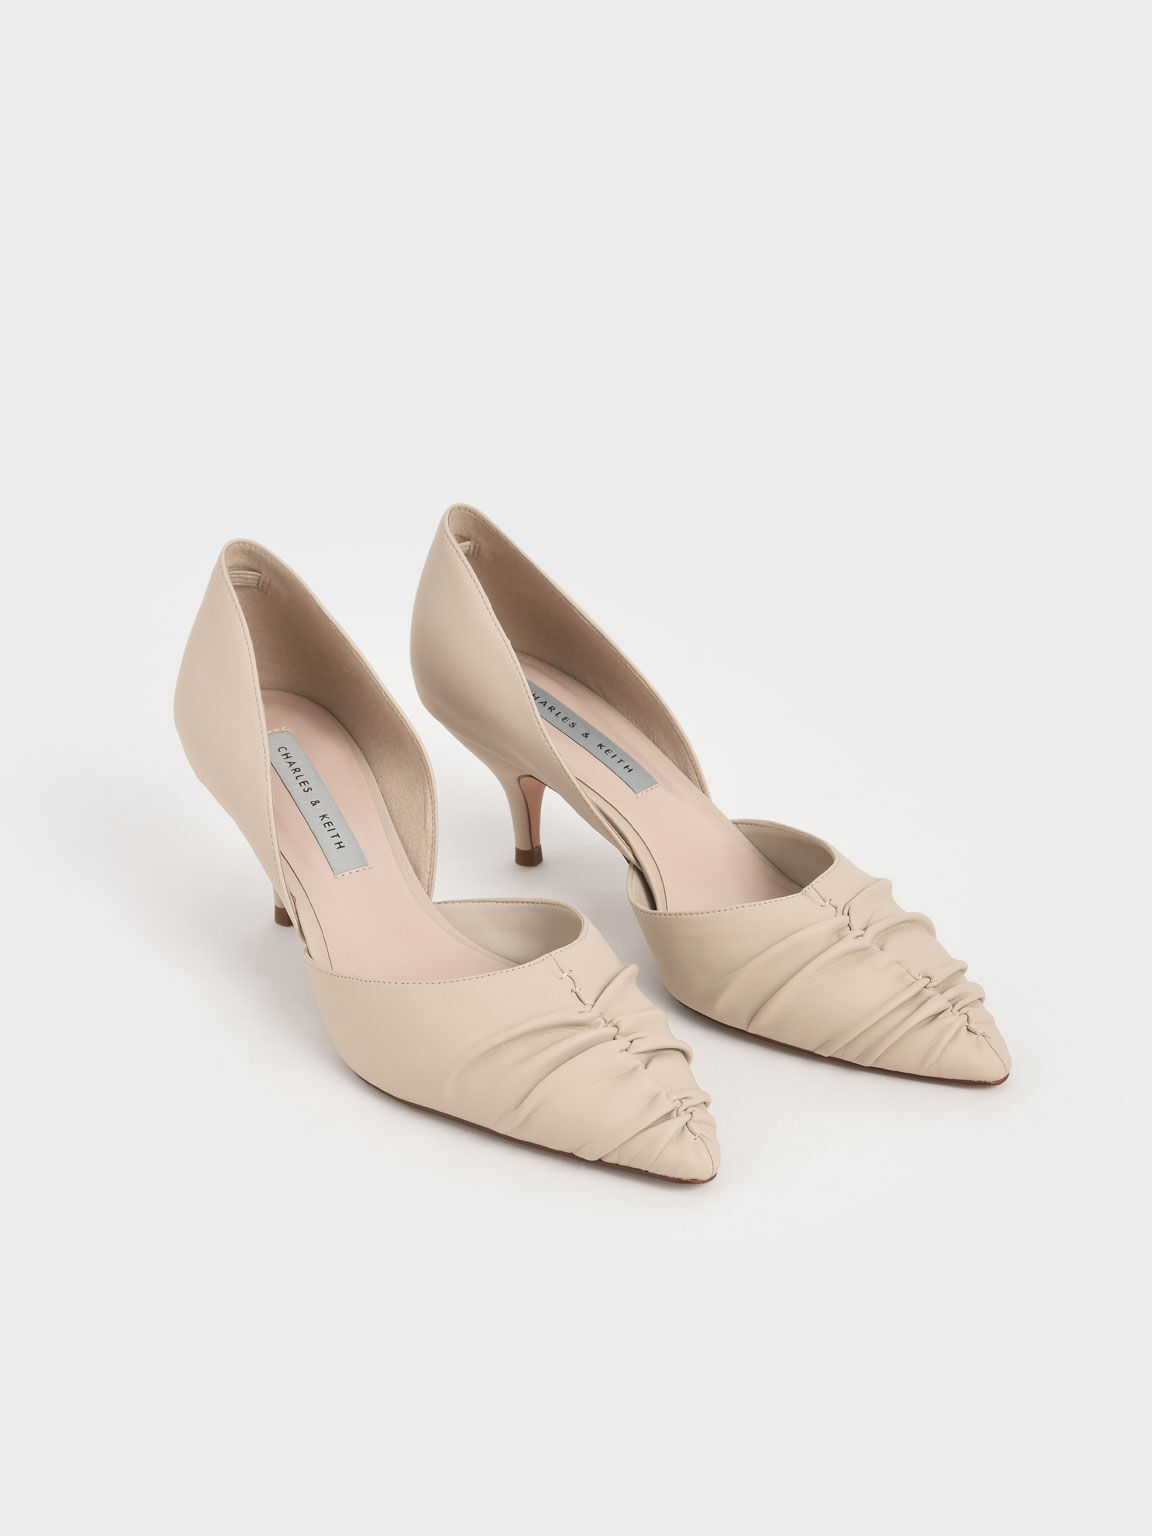 Ruched D'Orsay Court Shoes, Taupe, hi-res